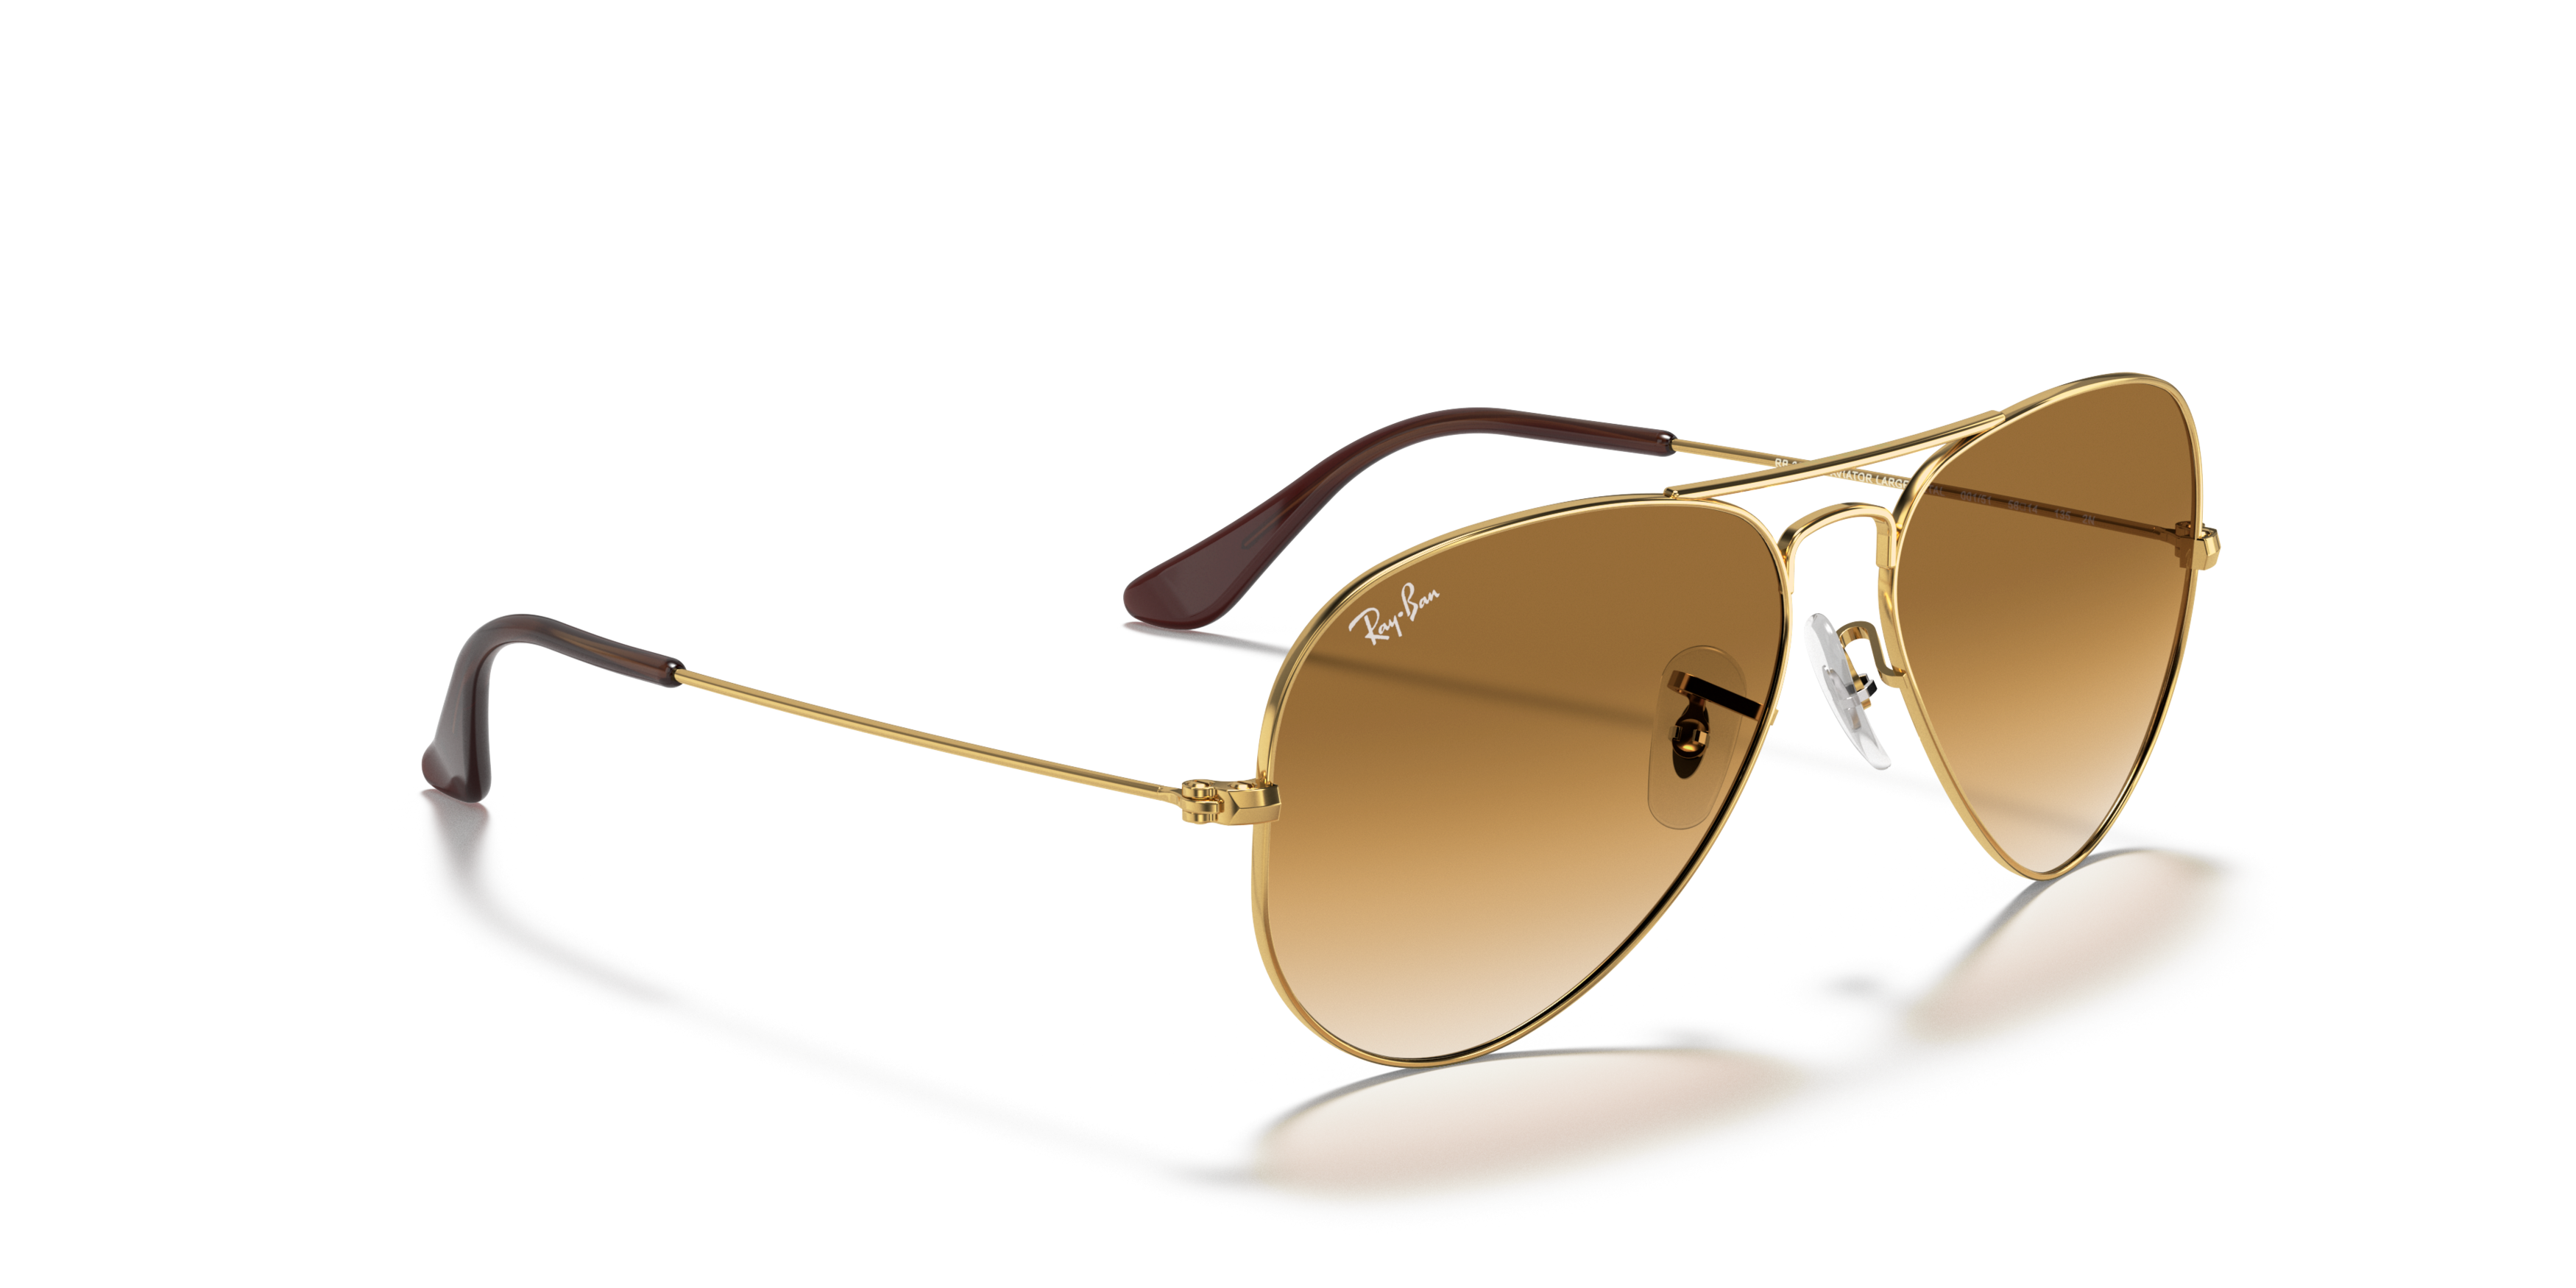 [products.image.angle_right01] Ray-Ban Aviator Gradient RB3025 001/51